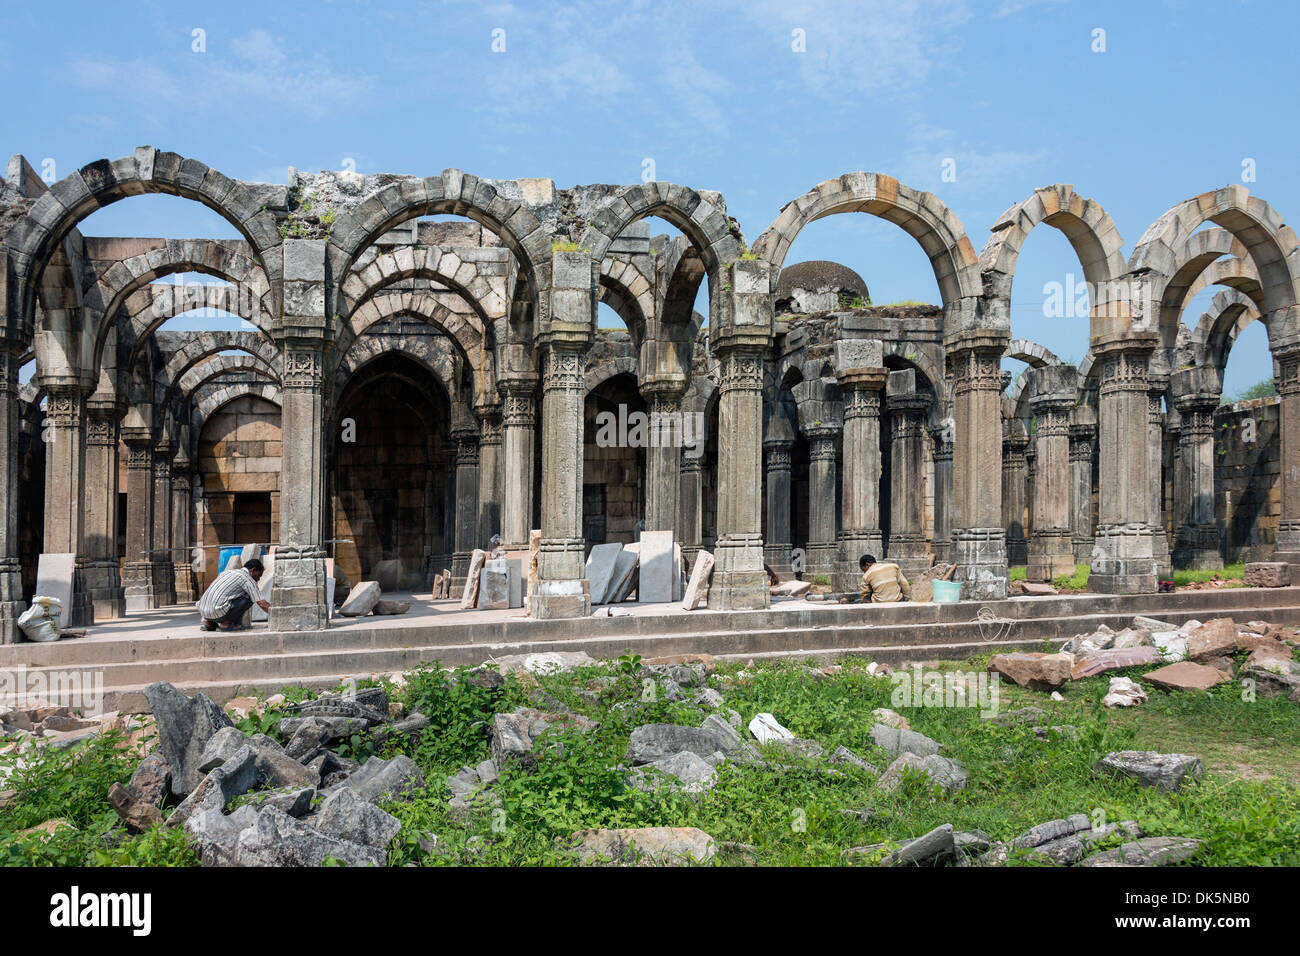 Multi-arched structure under reconstruction, Pavagadh Hill Road, Champaner-Pavagadh Archaeological Park, Gujurat State, India Stock Photo